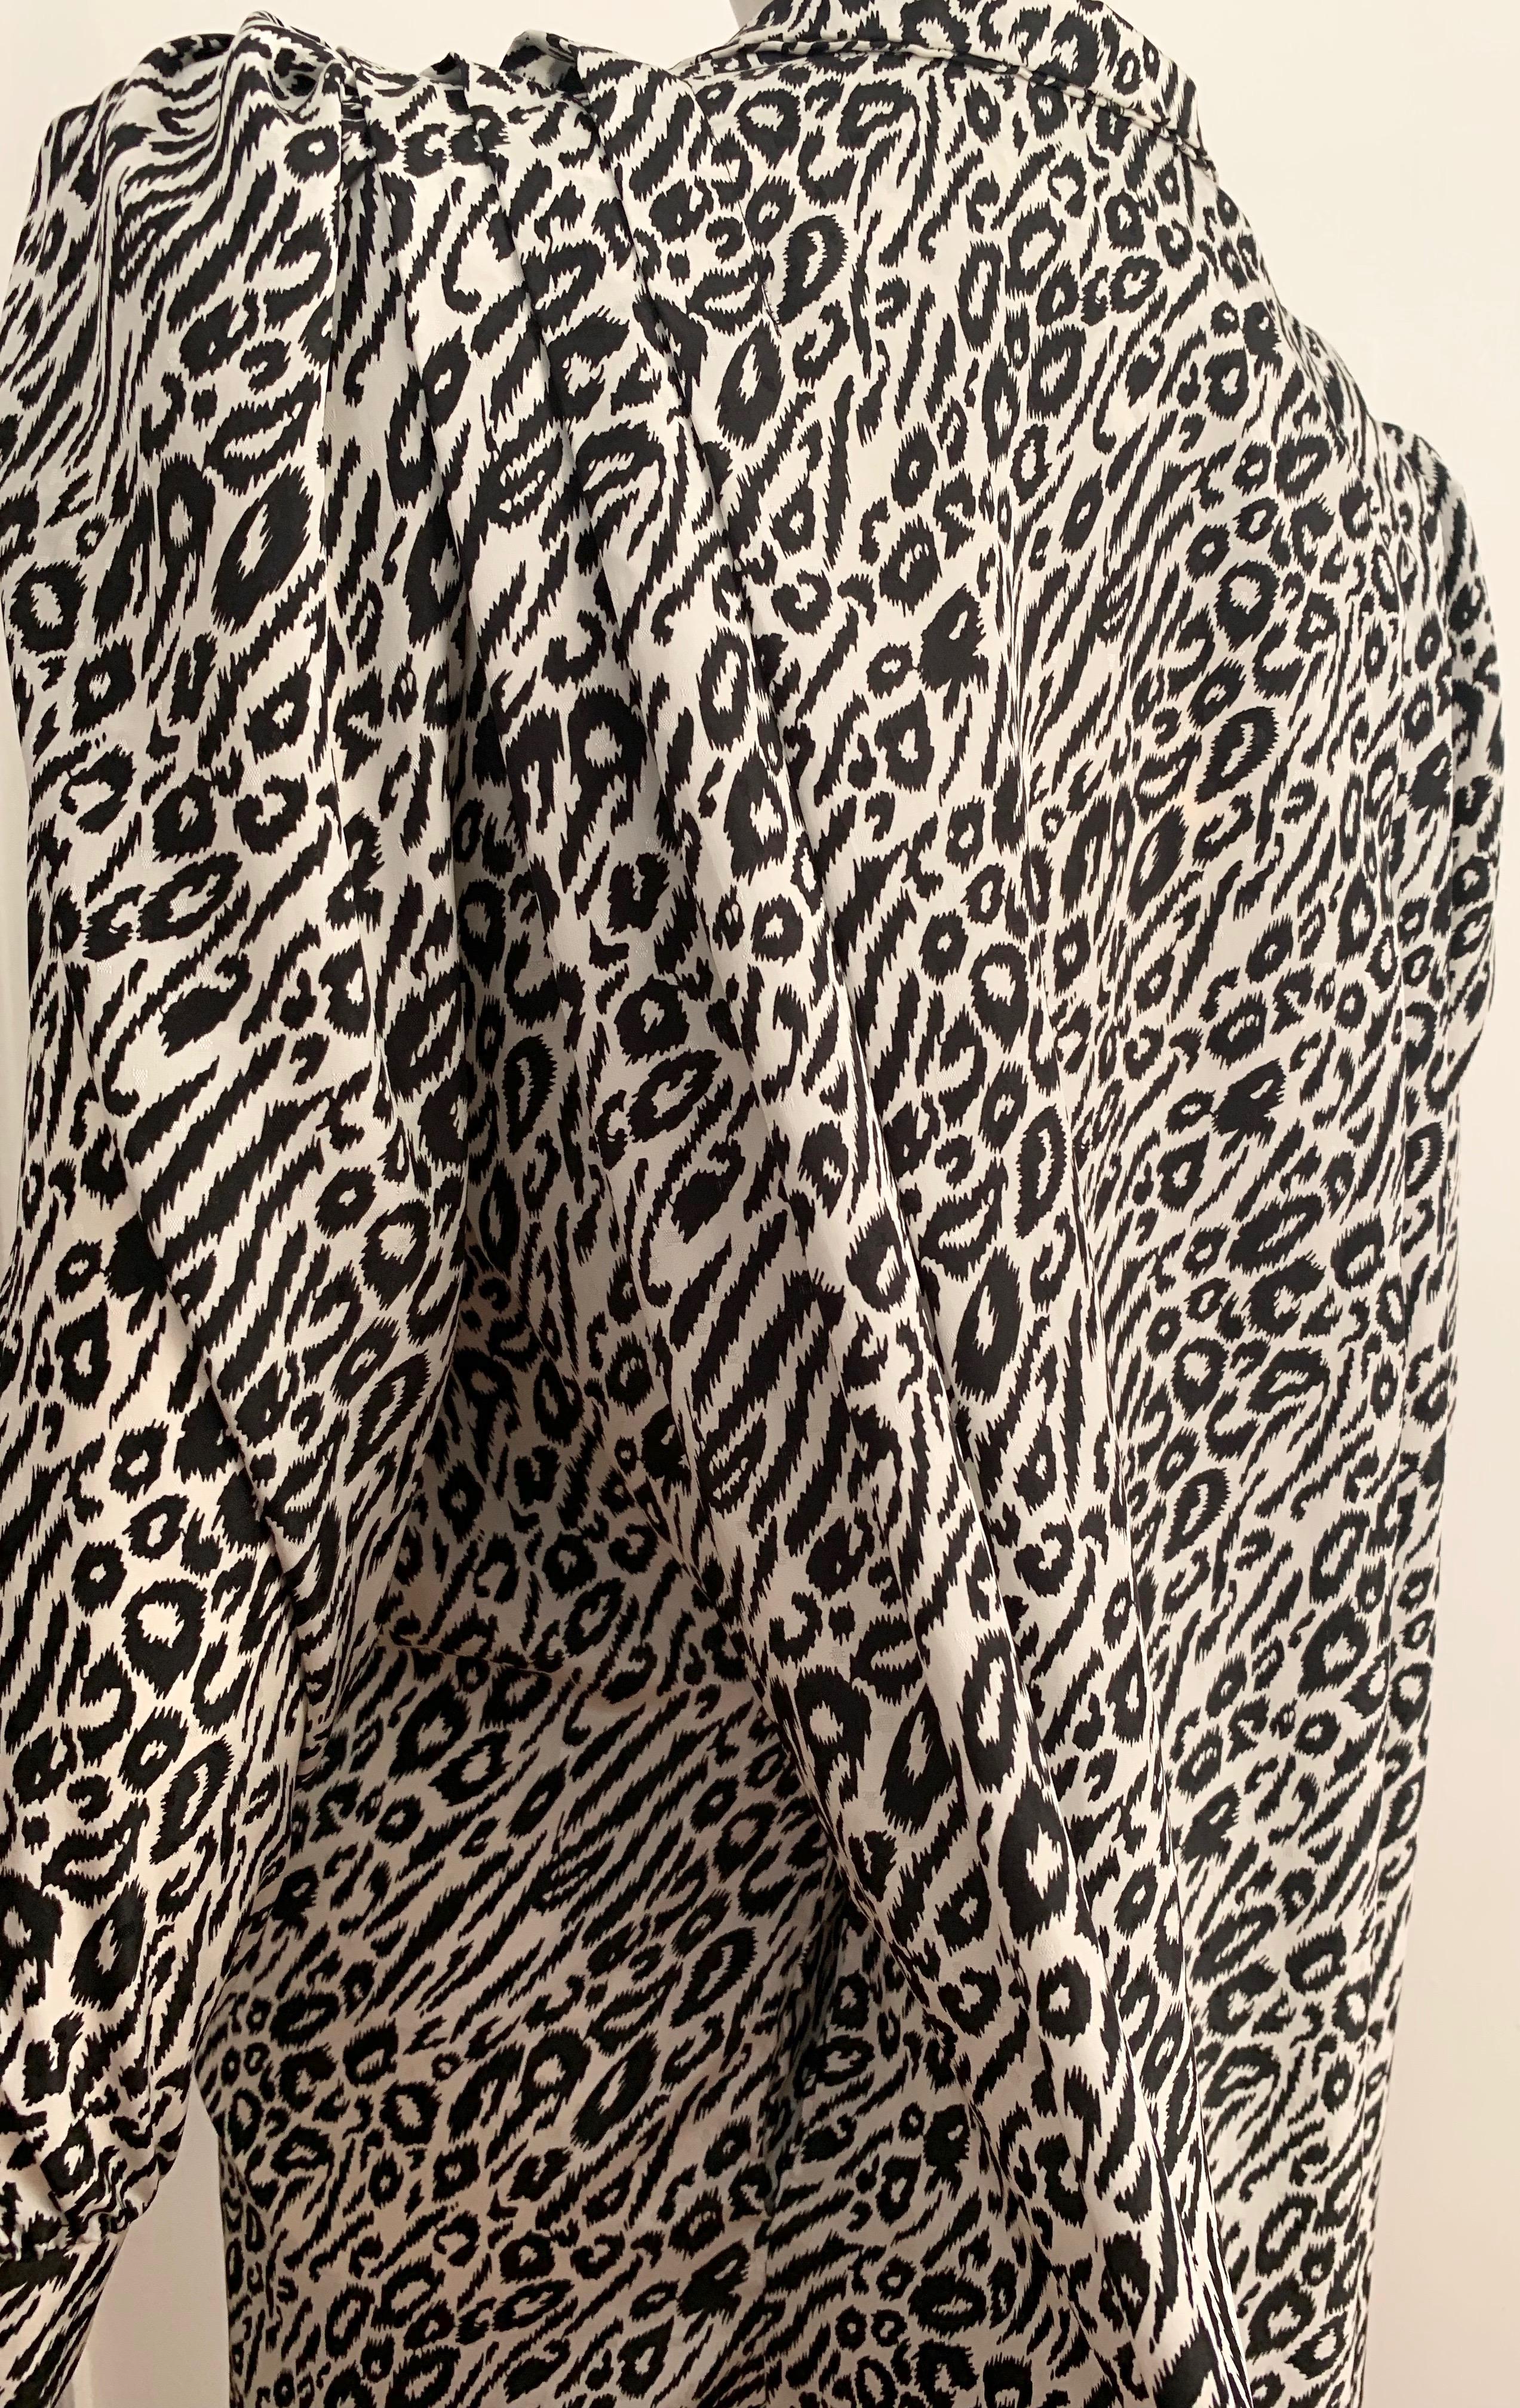 David Brown for Saks Fifth Avenue 1980s Caftan Loungewear Size Fits All. 13